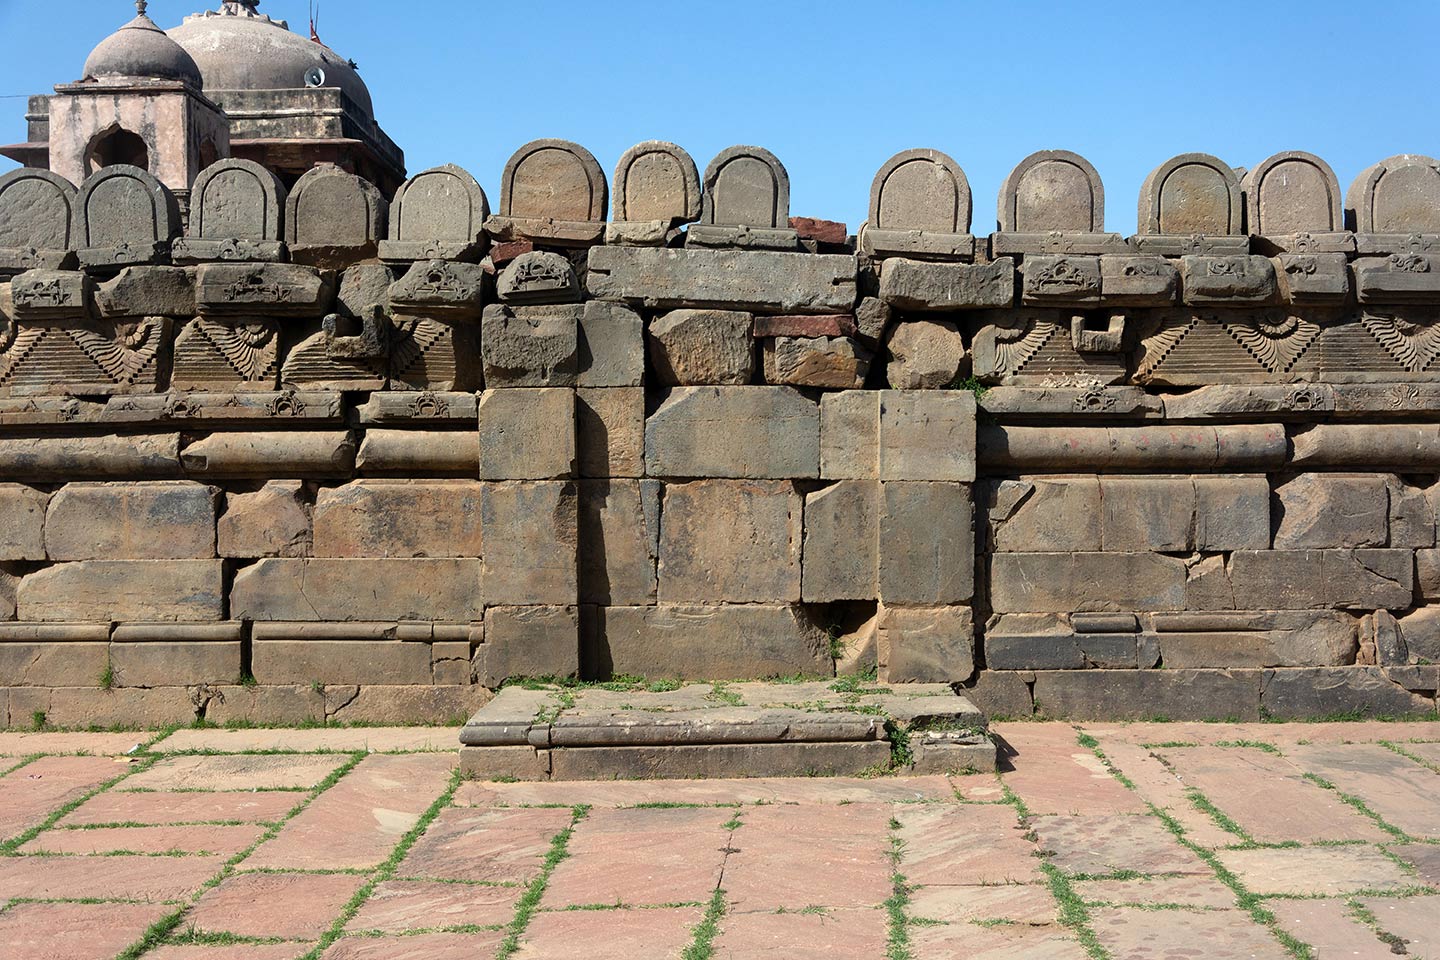 U-shaped rounded stones are assembled on the parapet, but their position or purpose in the original temple is unknown. The projected space attached to the adhisthana (centre) seems contemporary to the original temple and was likely used as a small shrine of the Panchayatan plan. The pradakshina along the east of the adhisthana has been paved with stone by the Archaeological Survey of India (ASI).